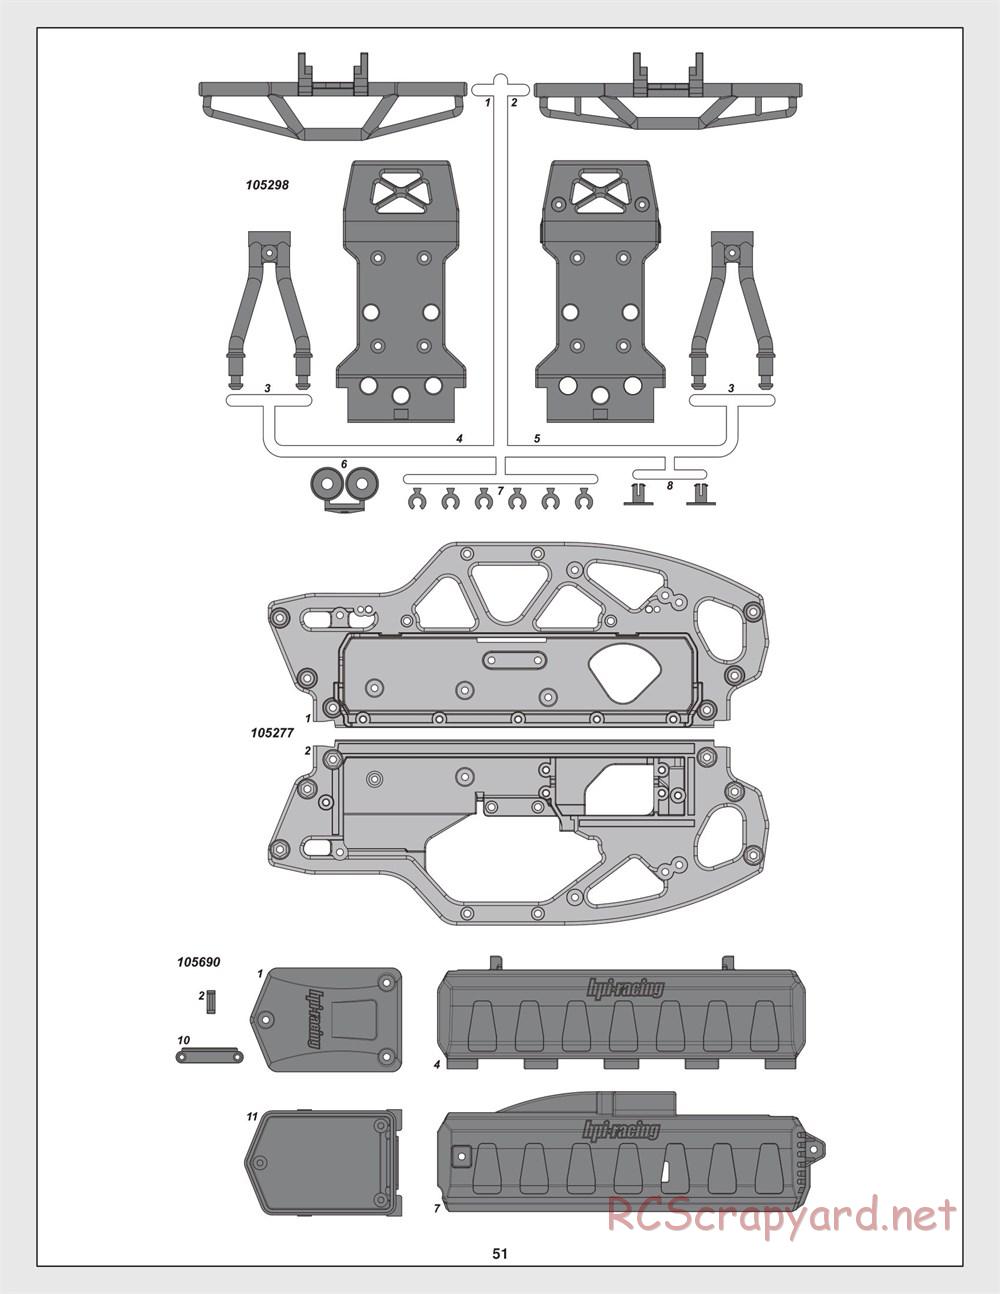 HPI - Savage XS Flux - Manual - Page 51